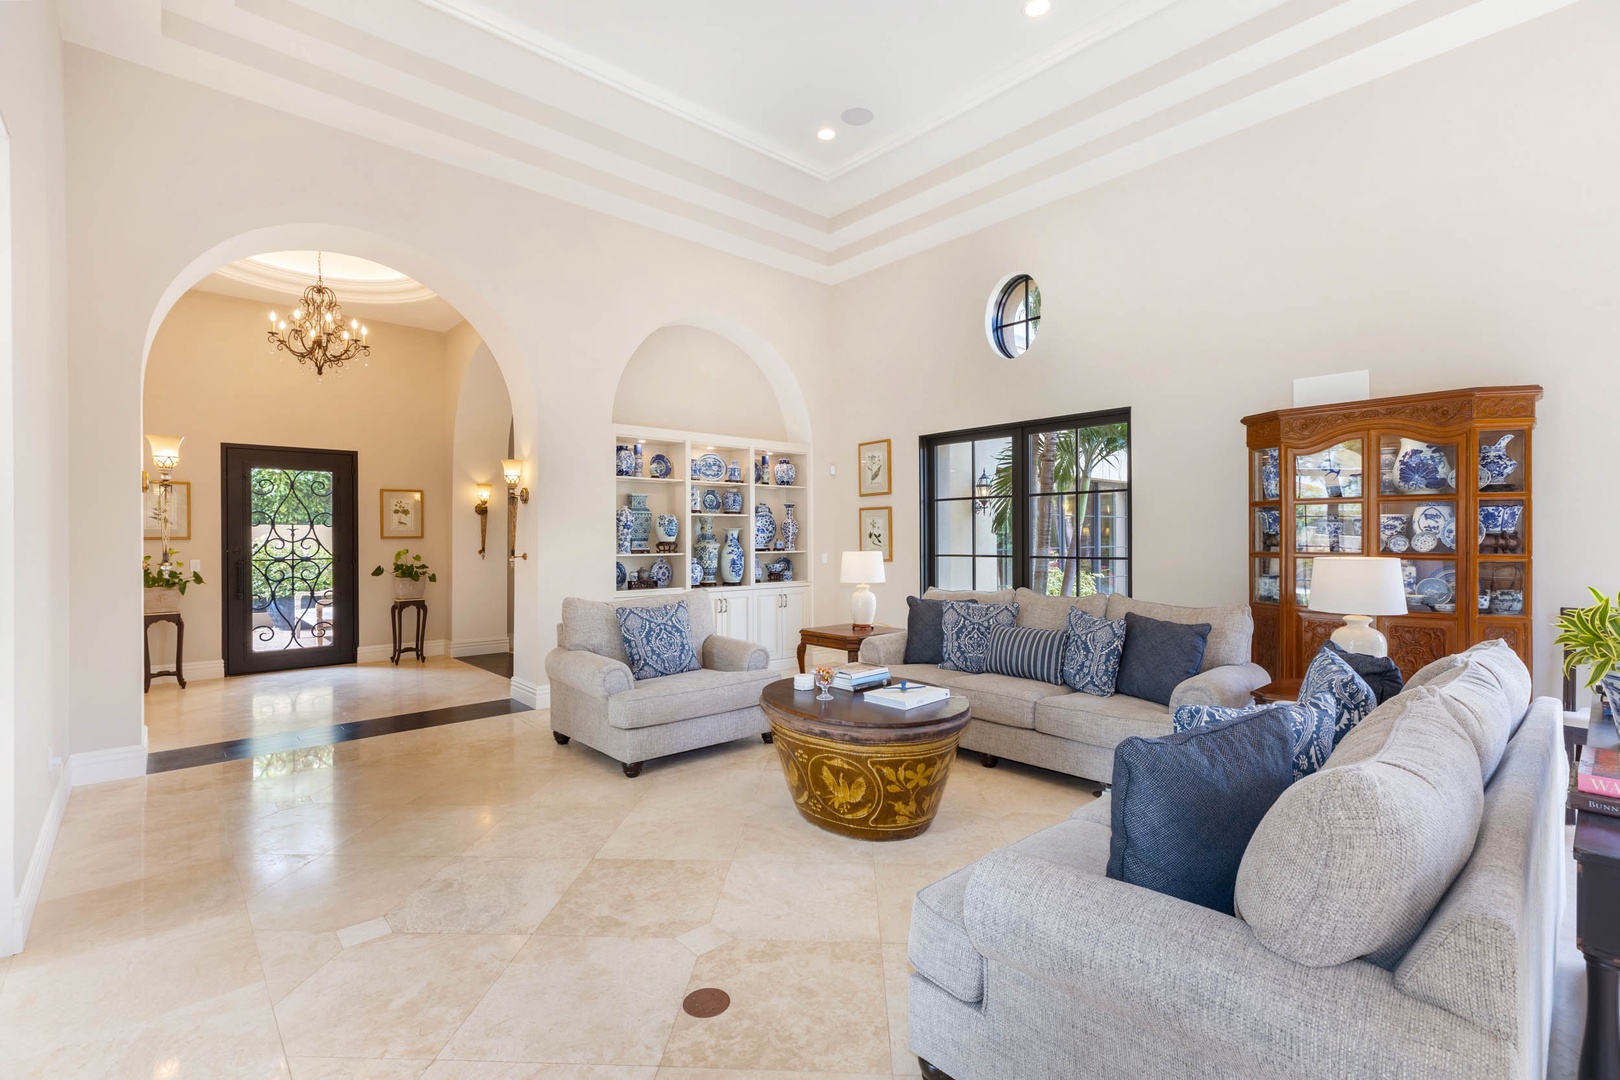 Honolulu Vacation Rentals, Royal Kahala Estate - Comfortable seating, sophisticated décor, and soaring ceilings that amplify the sense of space and luxury.